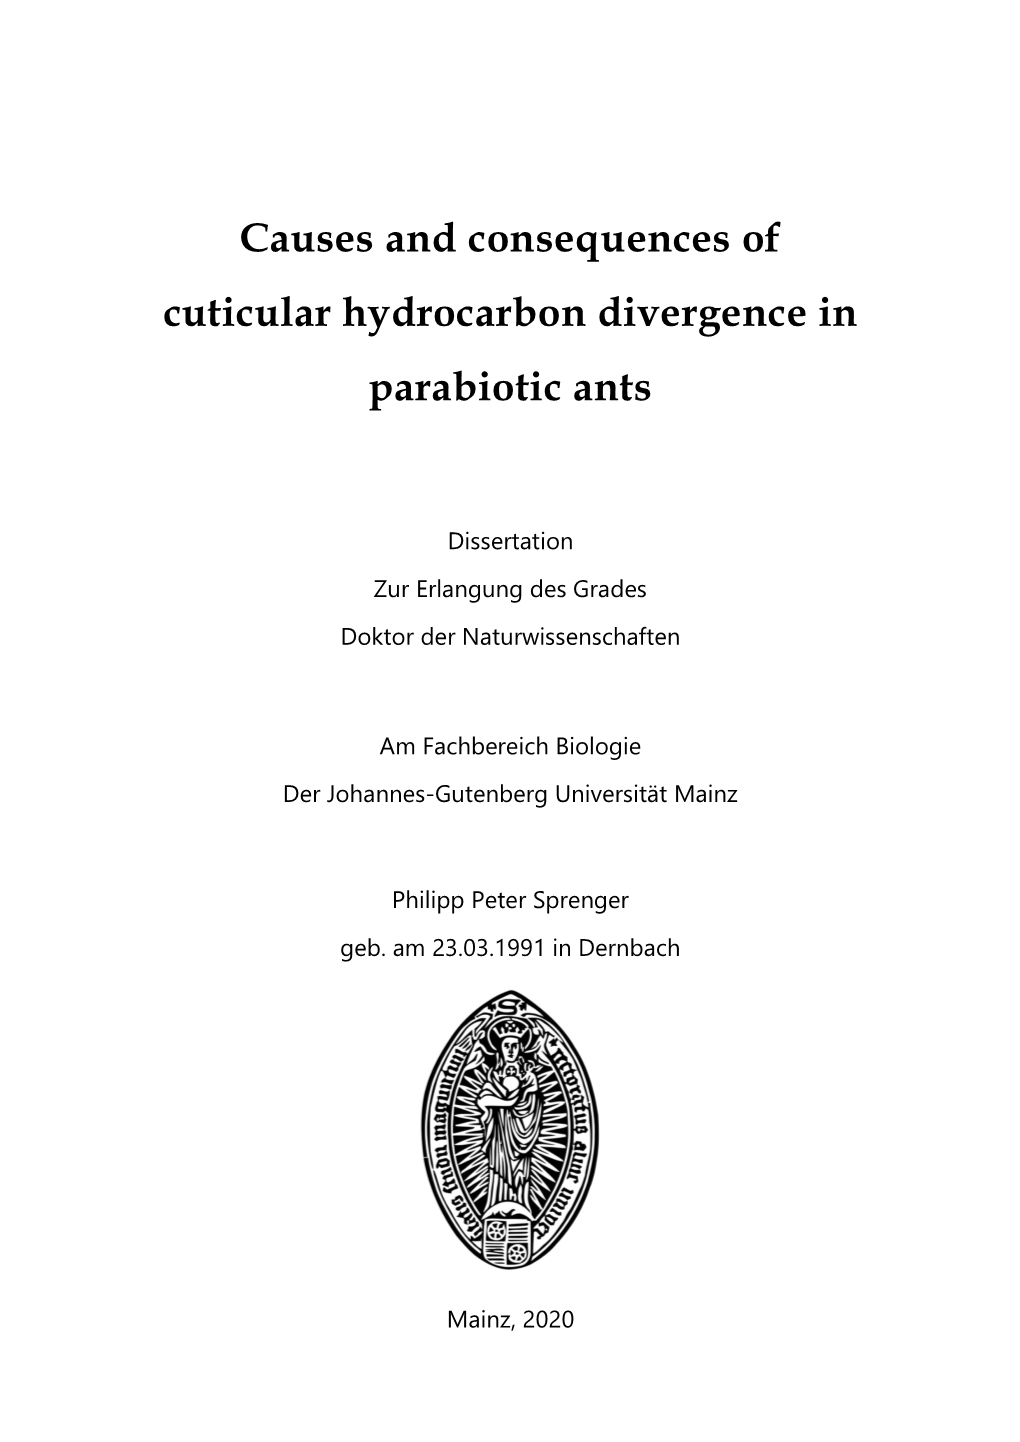 Causes and Consequences of Cuticular Hydrocarbon Divergence in Parabiotic Ants